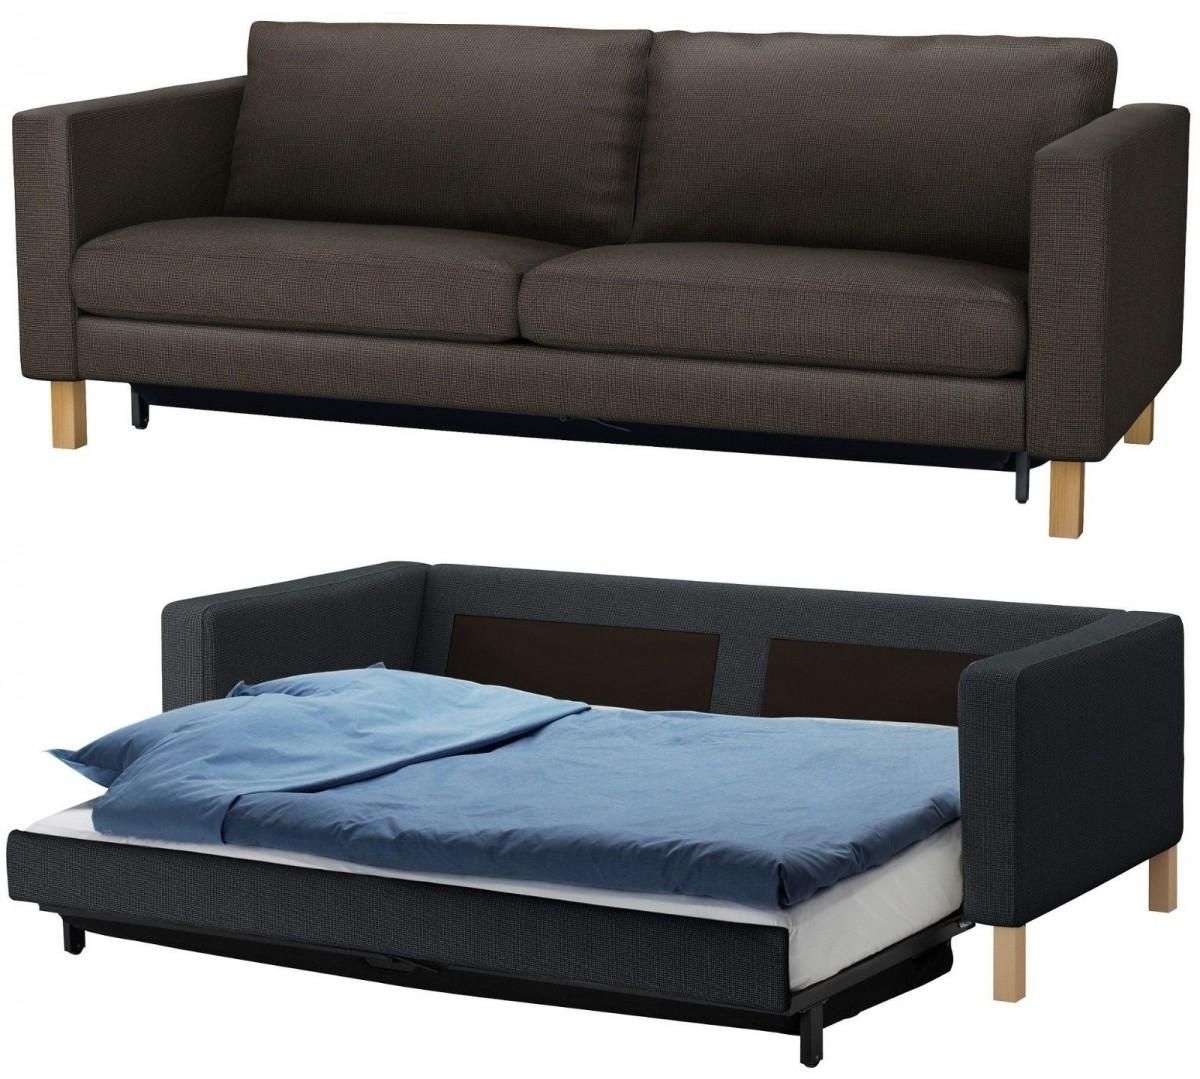 About The Ikea Sleeper Sofa : S3Net – Sectional Sofas Sale Within Sleeper Sofas Ikea (View 5 of 20)